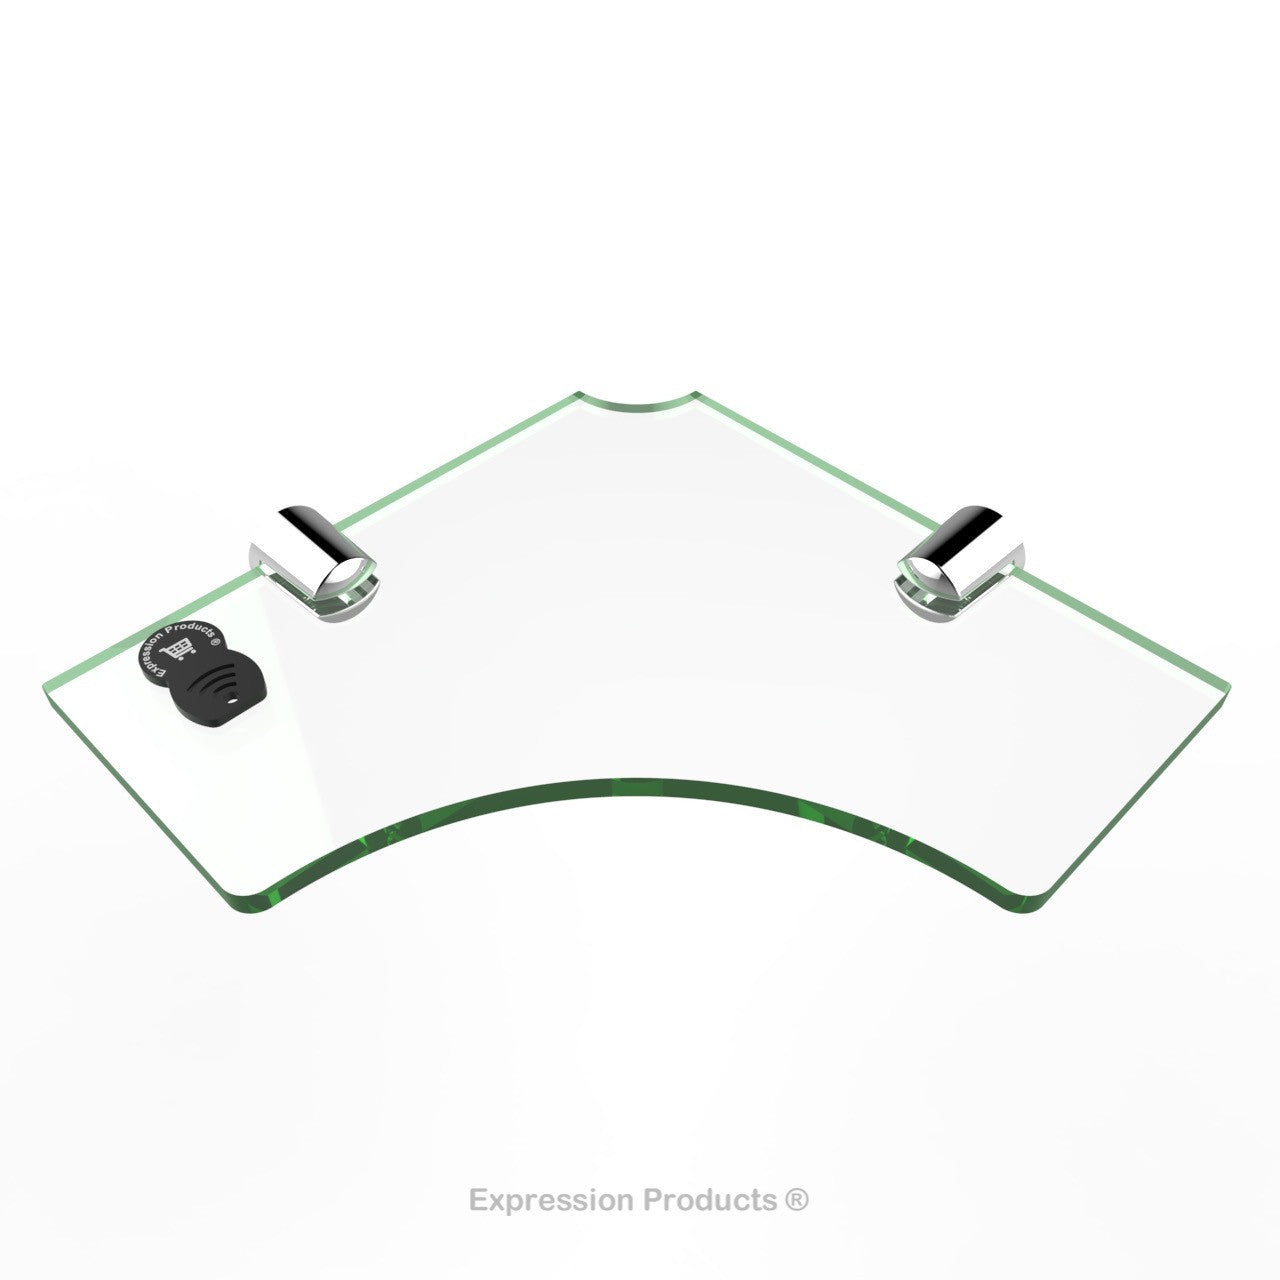 Corner Acrylic Shelf With Cable Feed Through - Style 004 - Expression Products Ltd